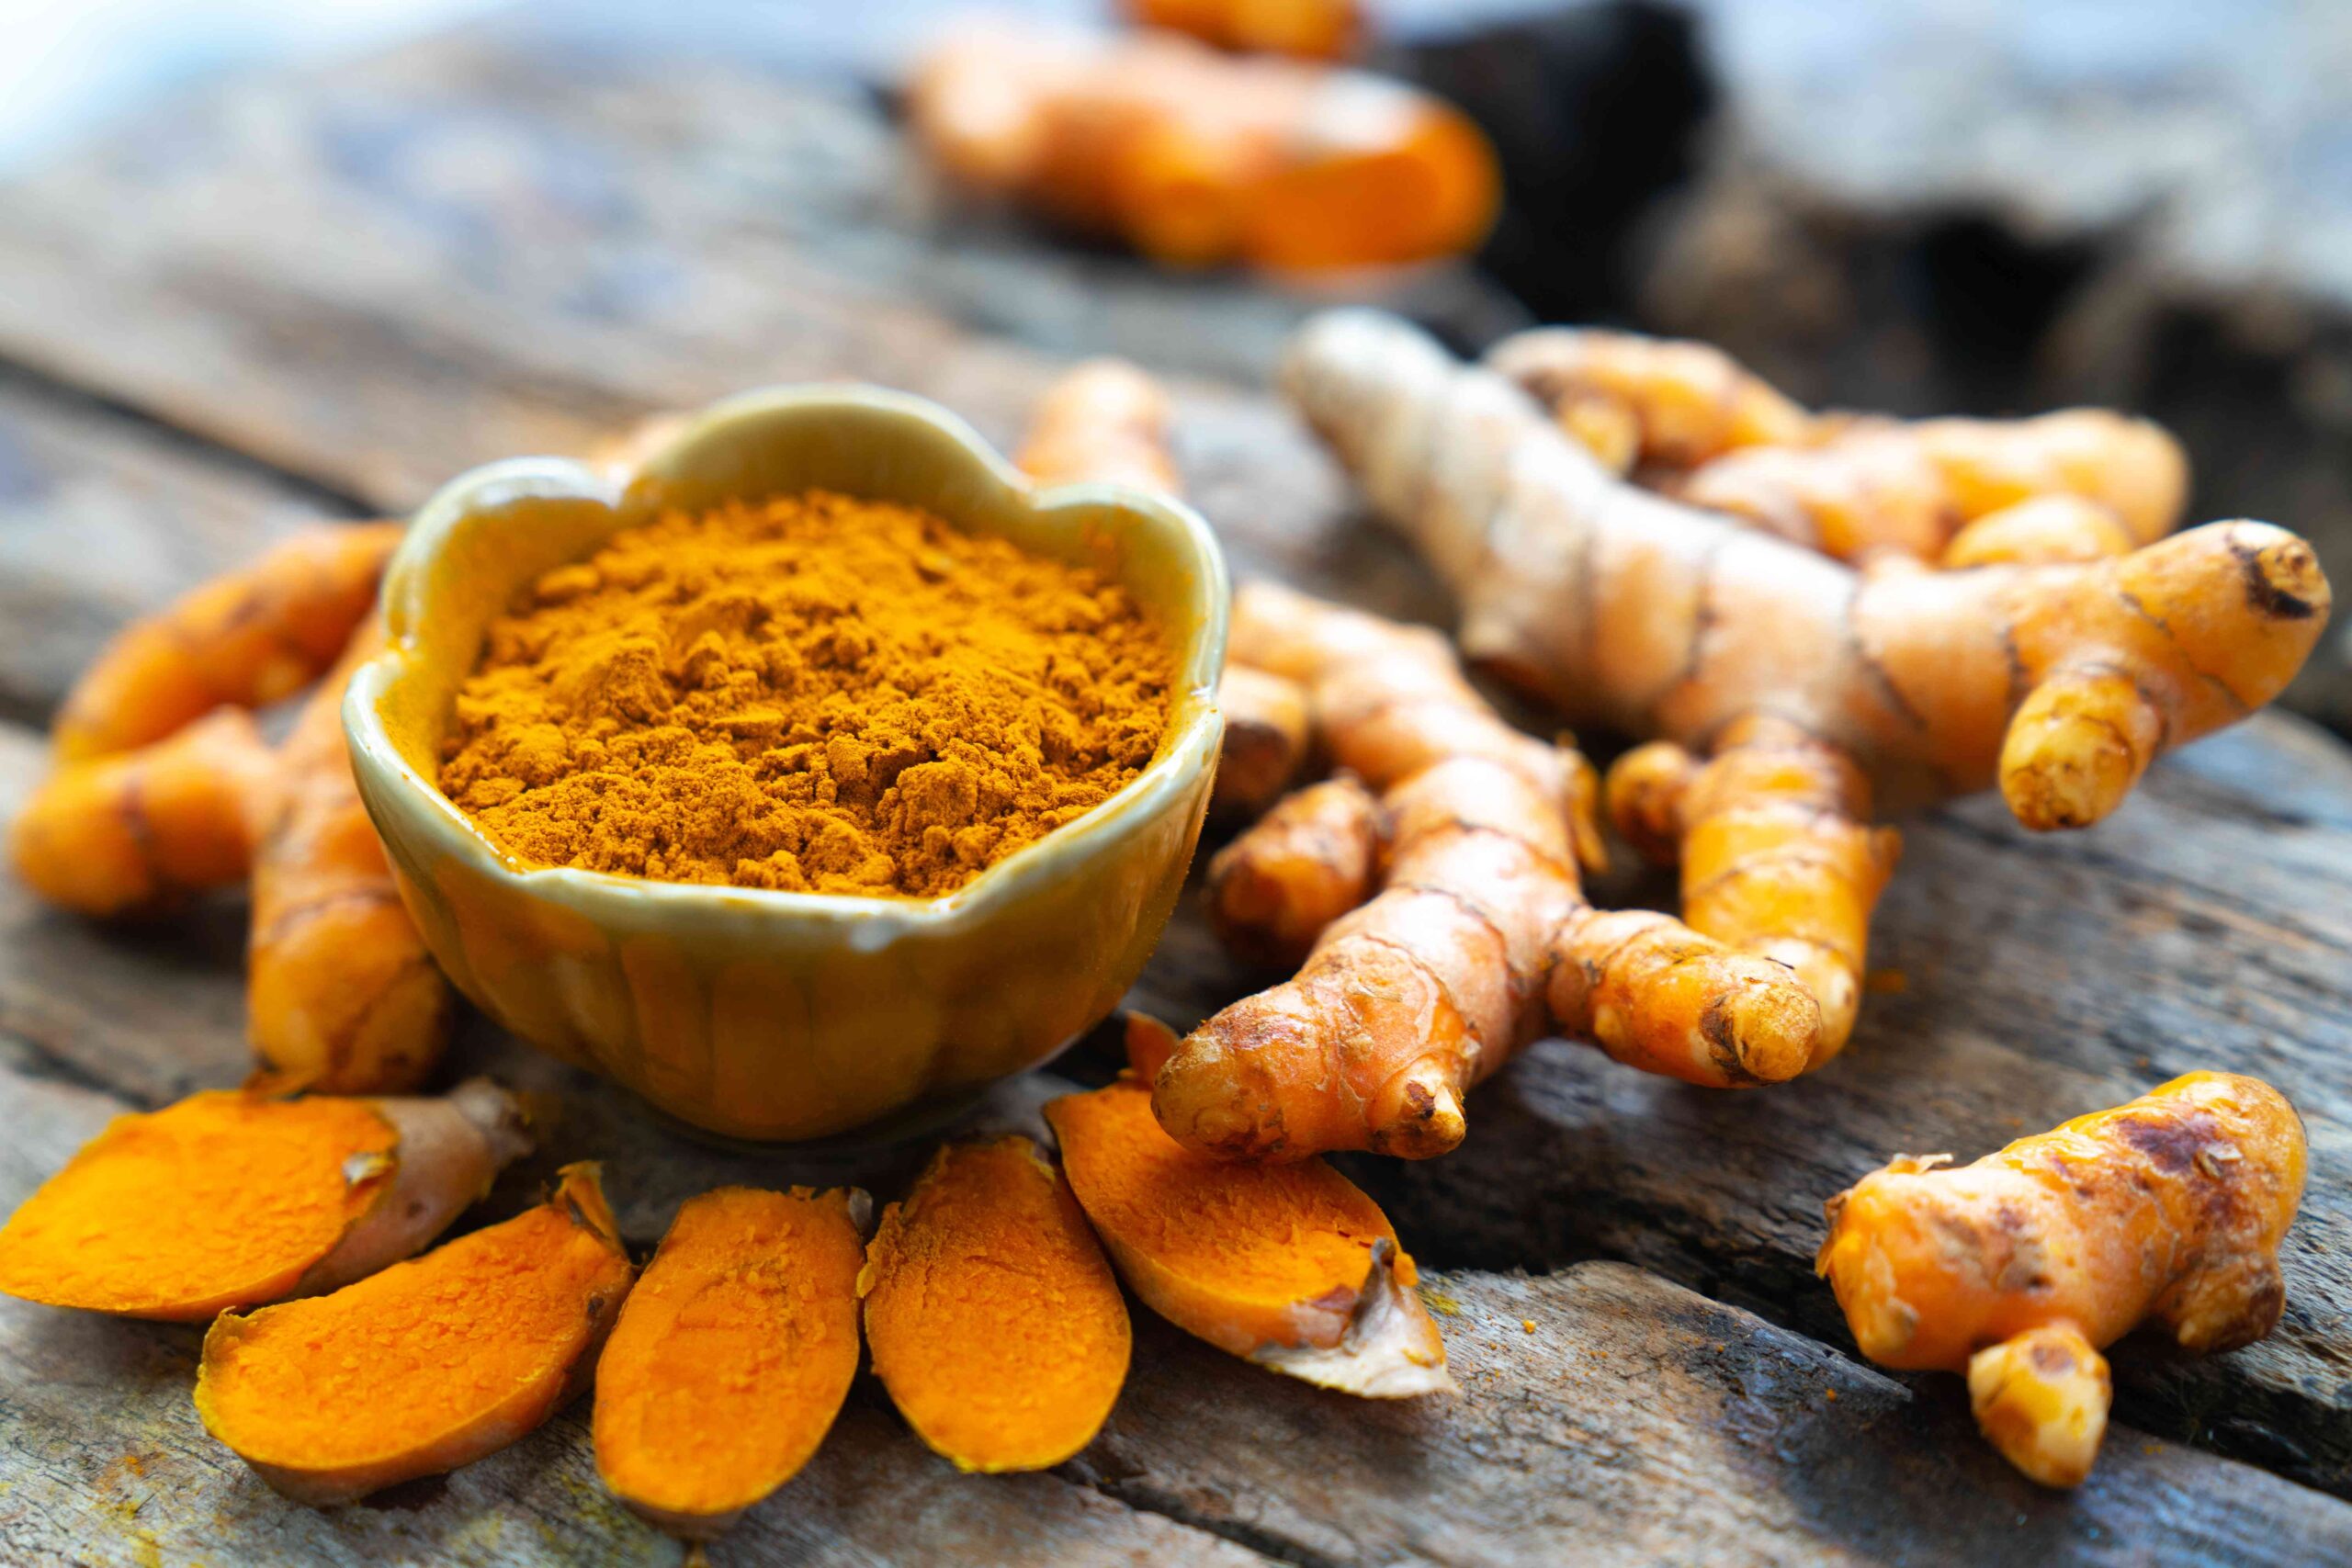 Does Turmeric help to treat erectile dysfunction?